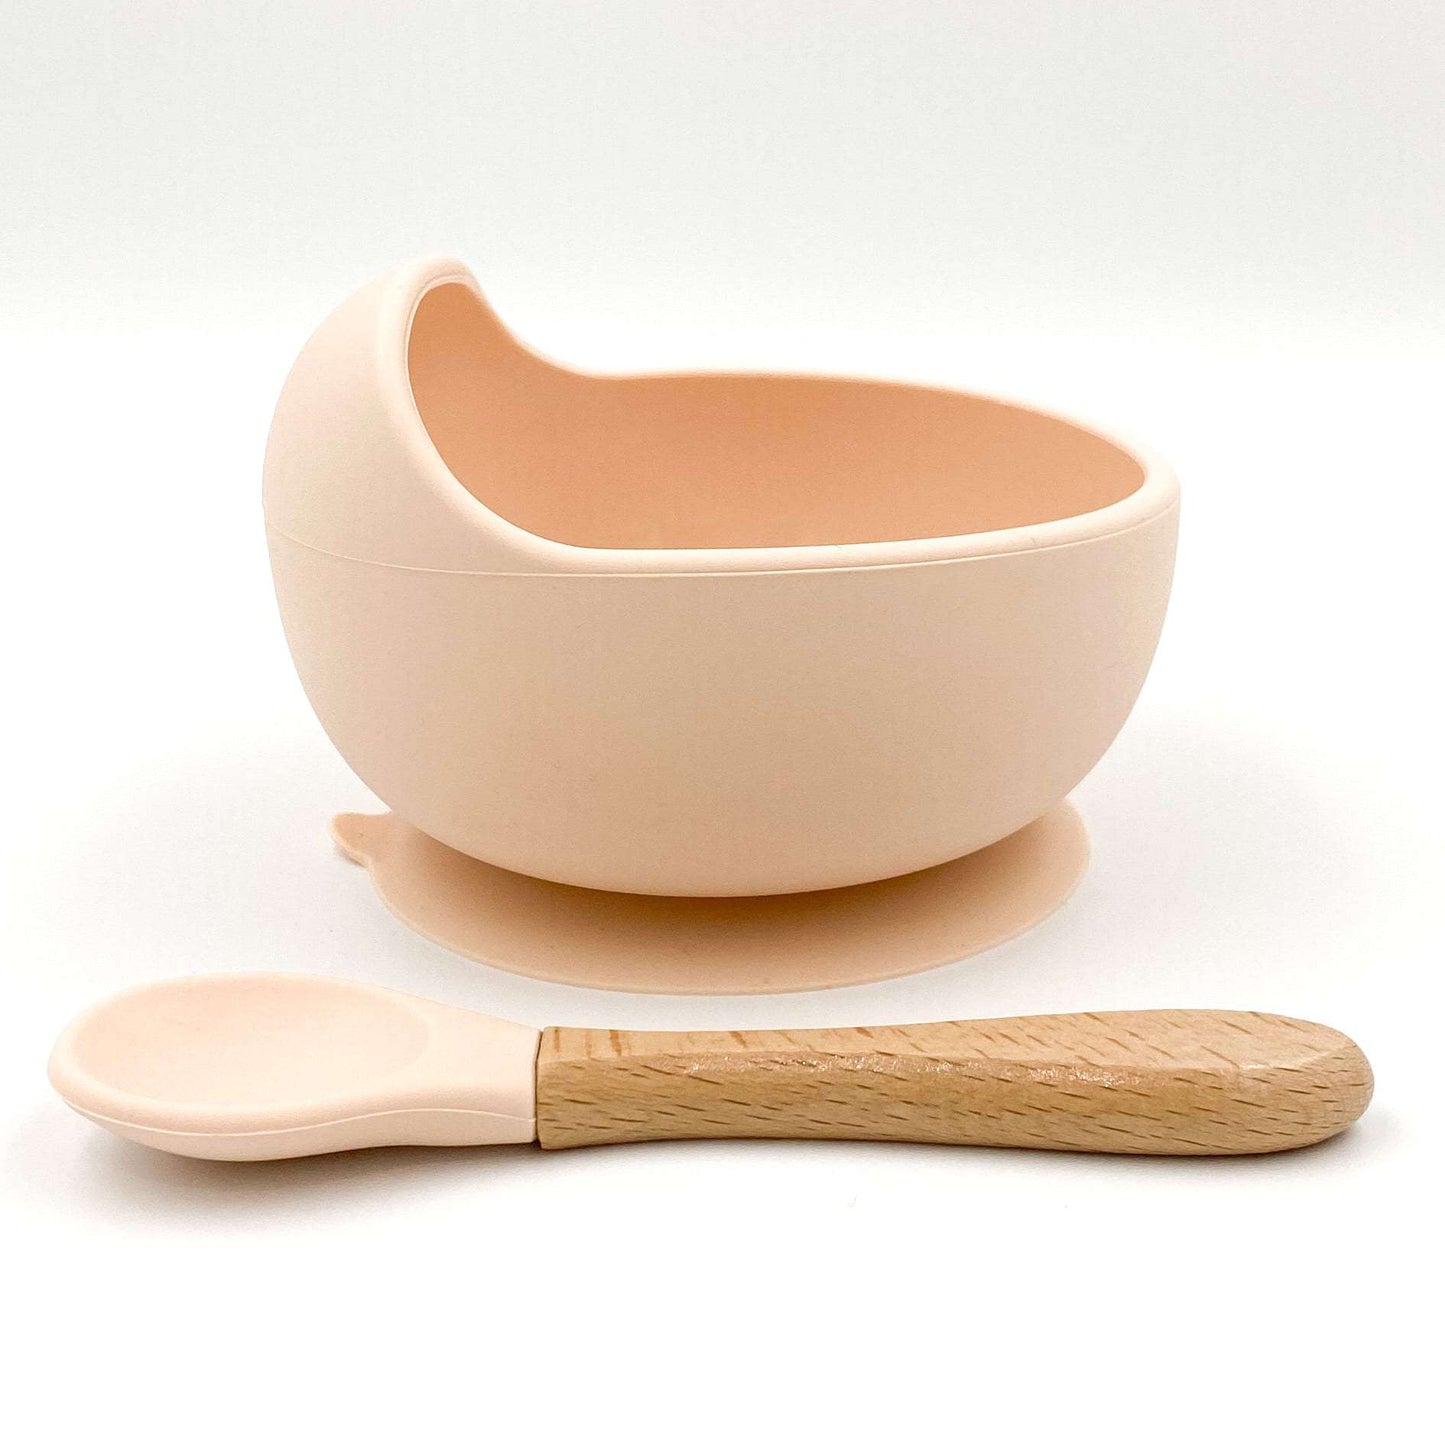 Silicone Suction Baby Bowl and Spoon Set